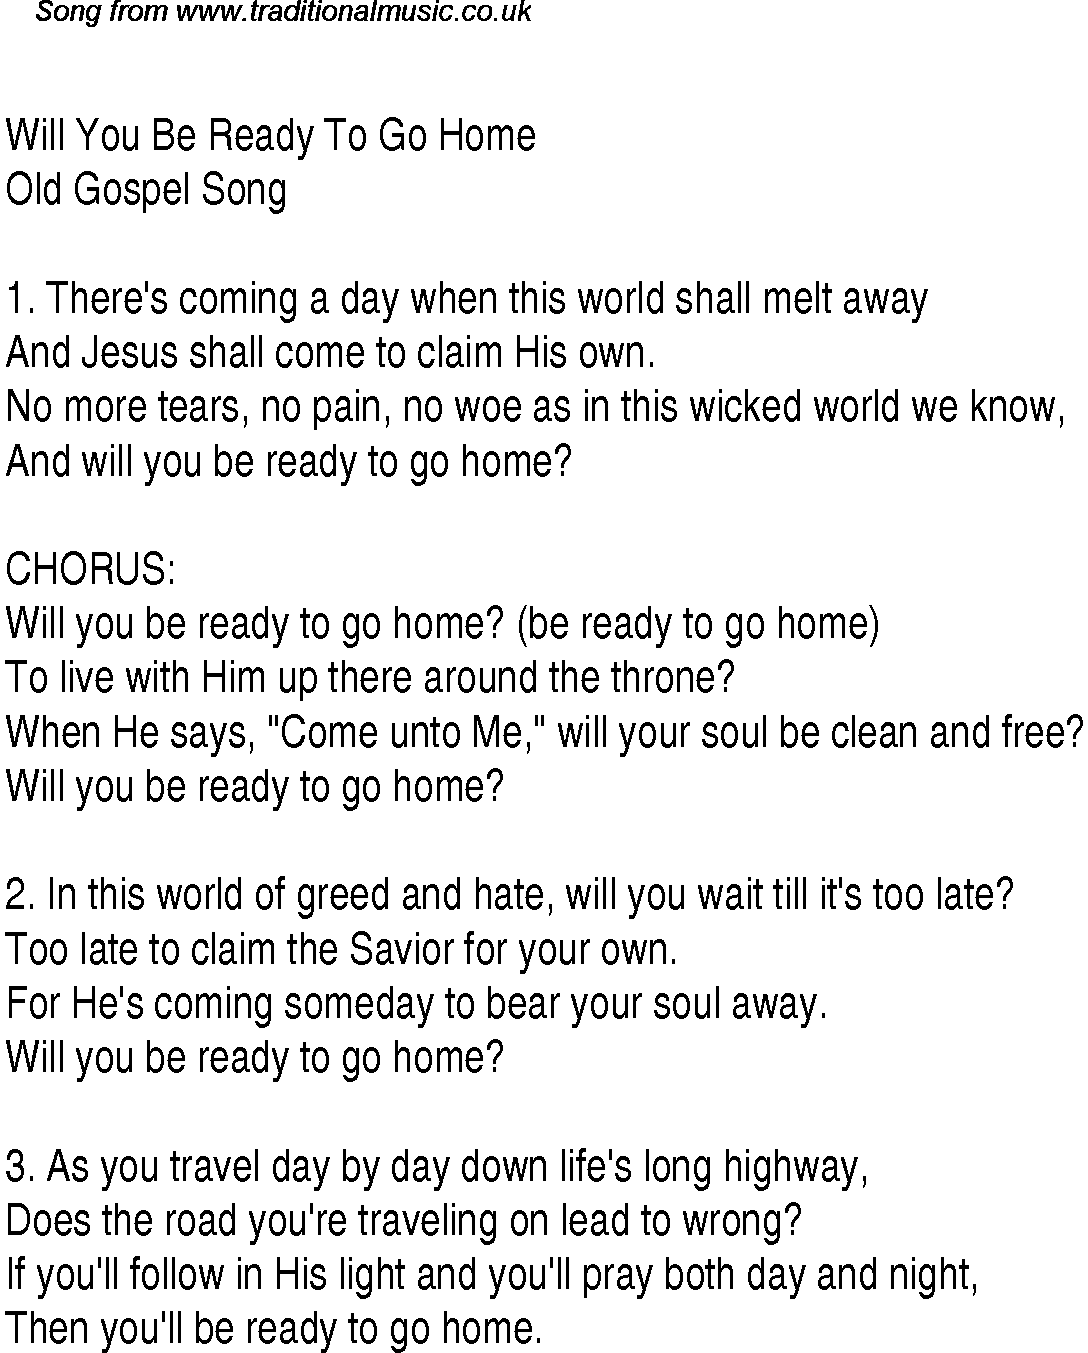 Gospel Song: will-you-be-ready-to-go-home, lyrics and chords.